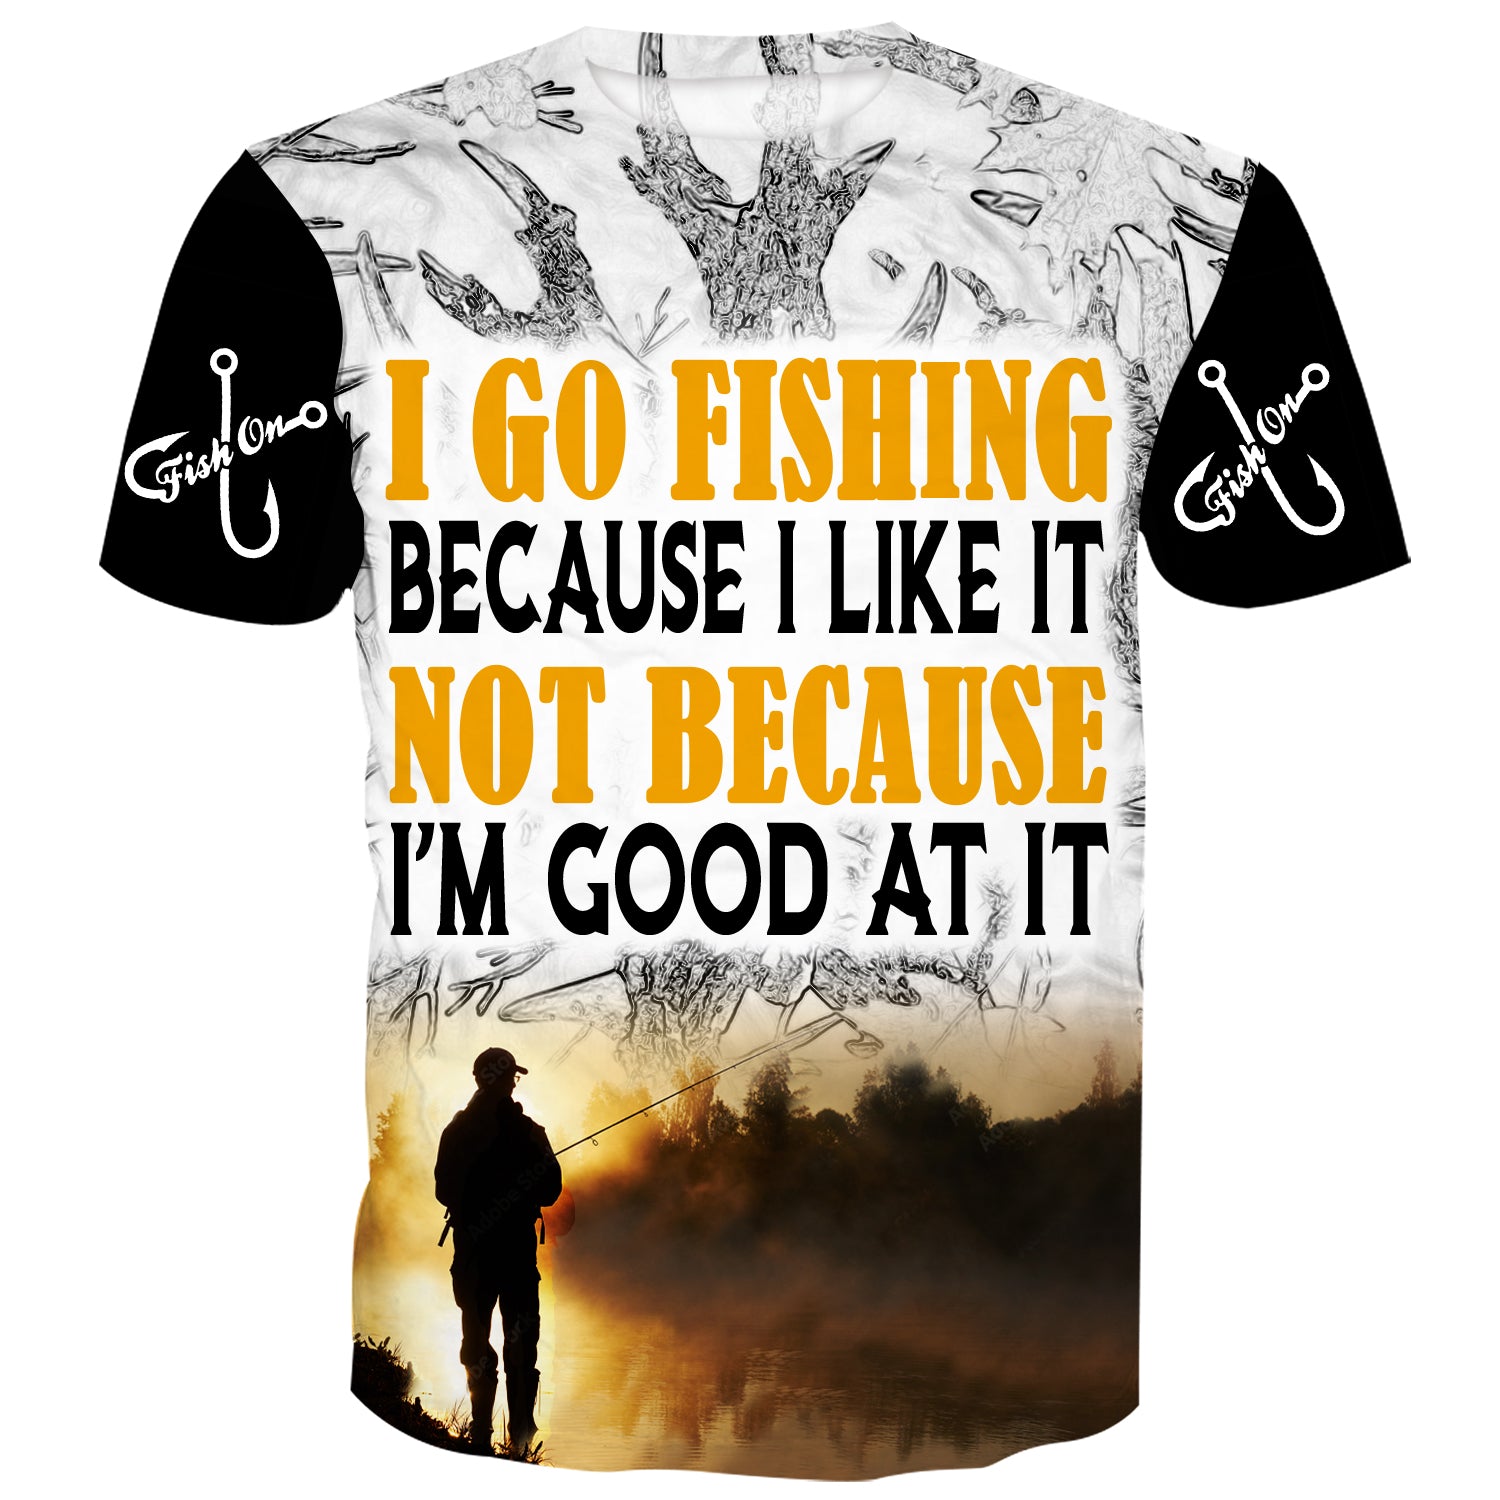 Image of an angler holding a fishing rod with the saying "I Go Fishing Because I Like It, Not Because I Am Good At It"